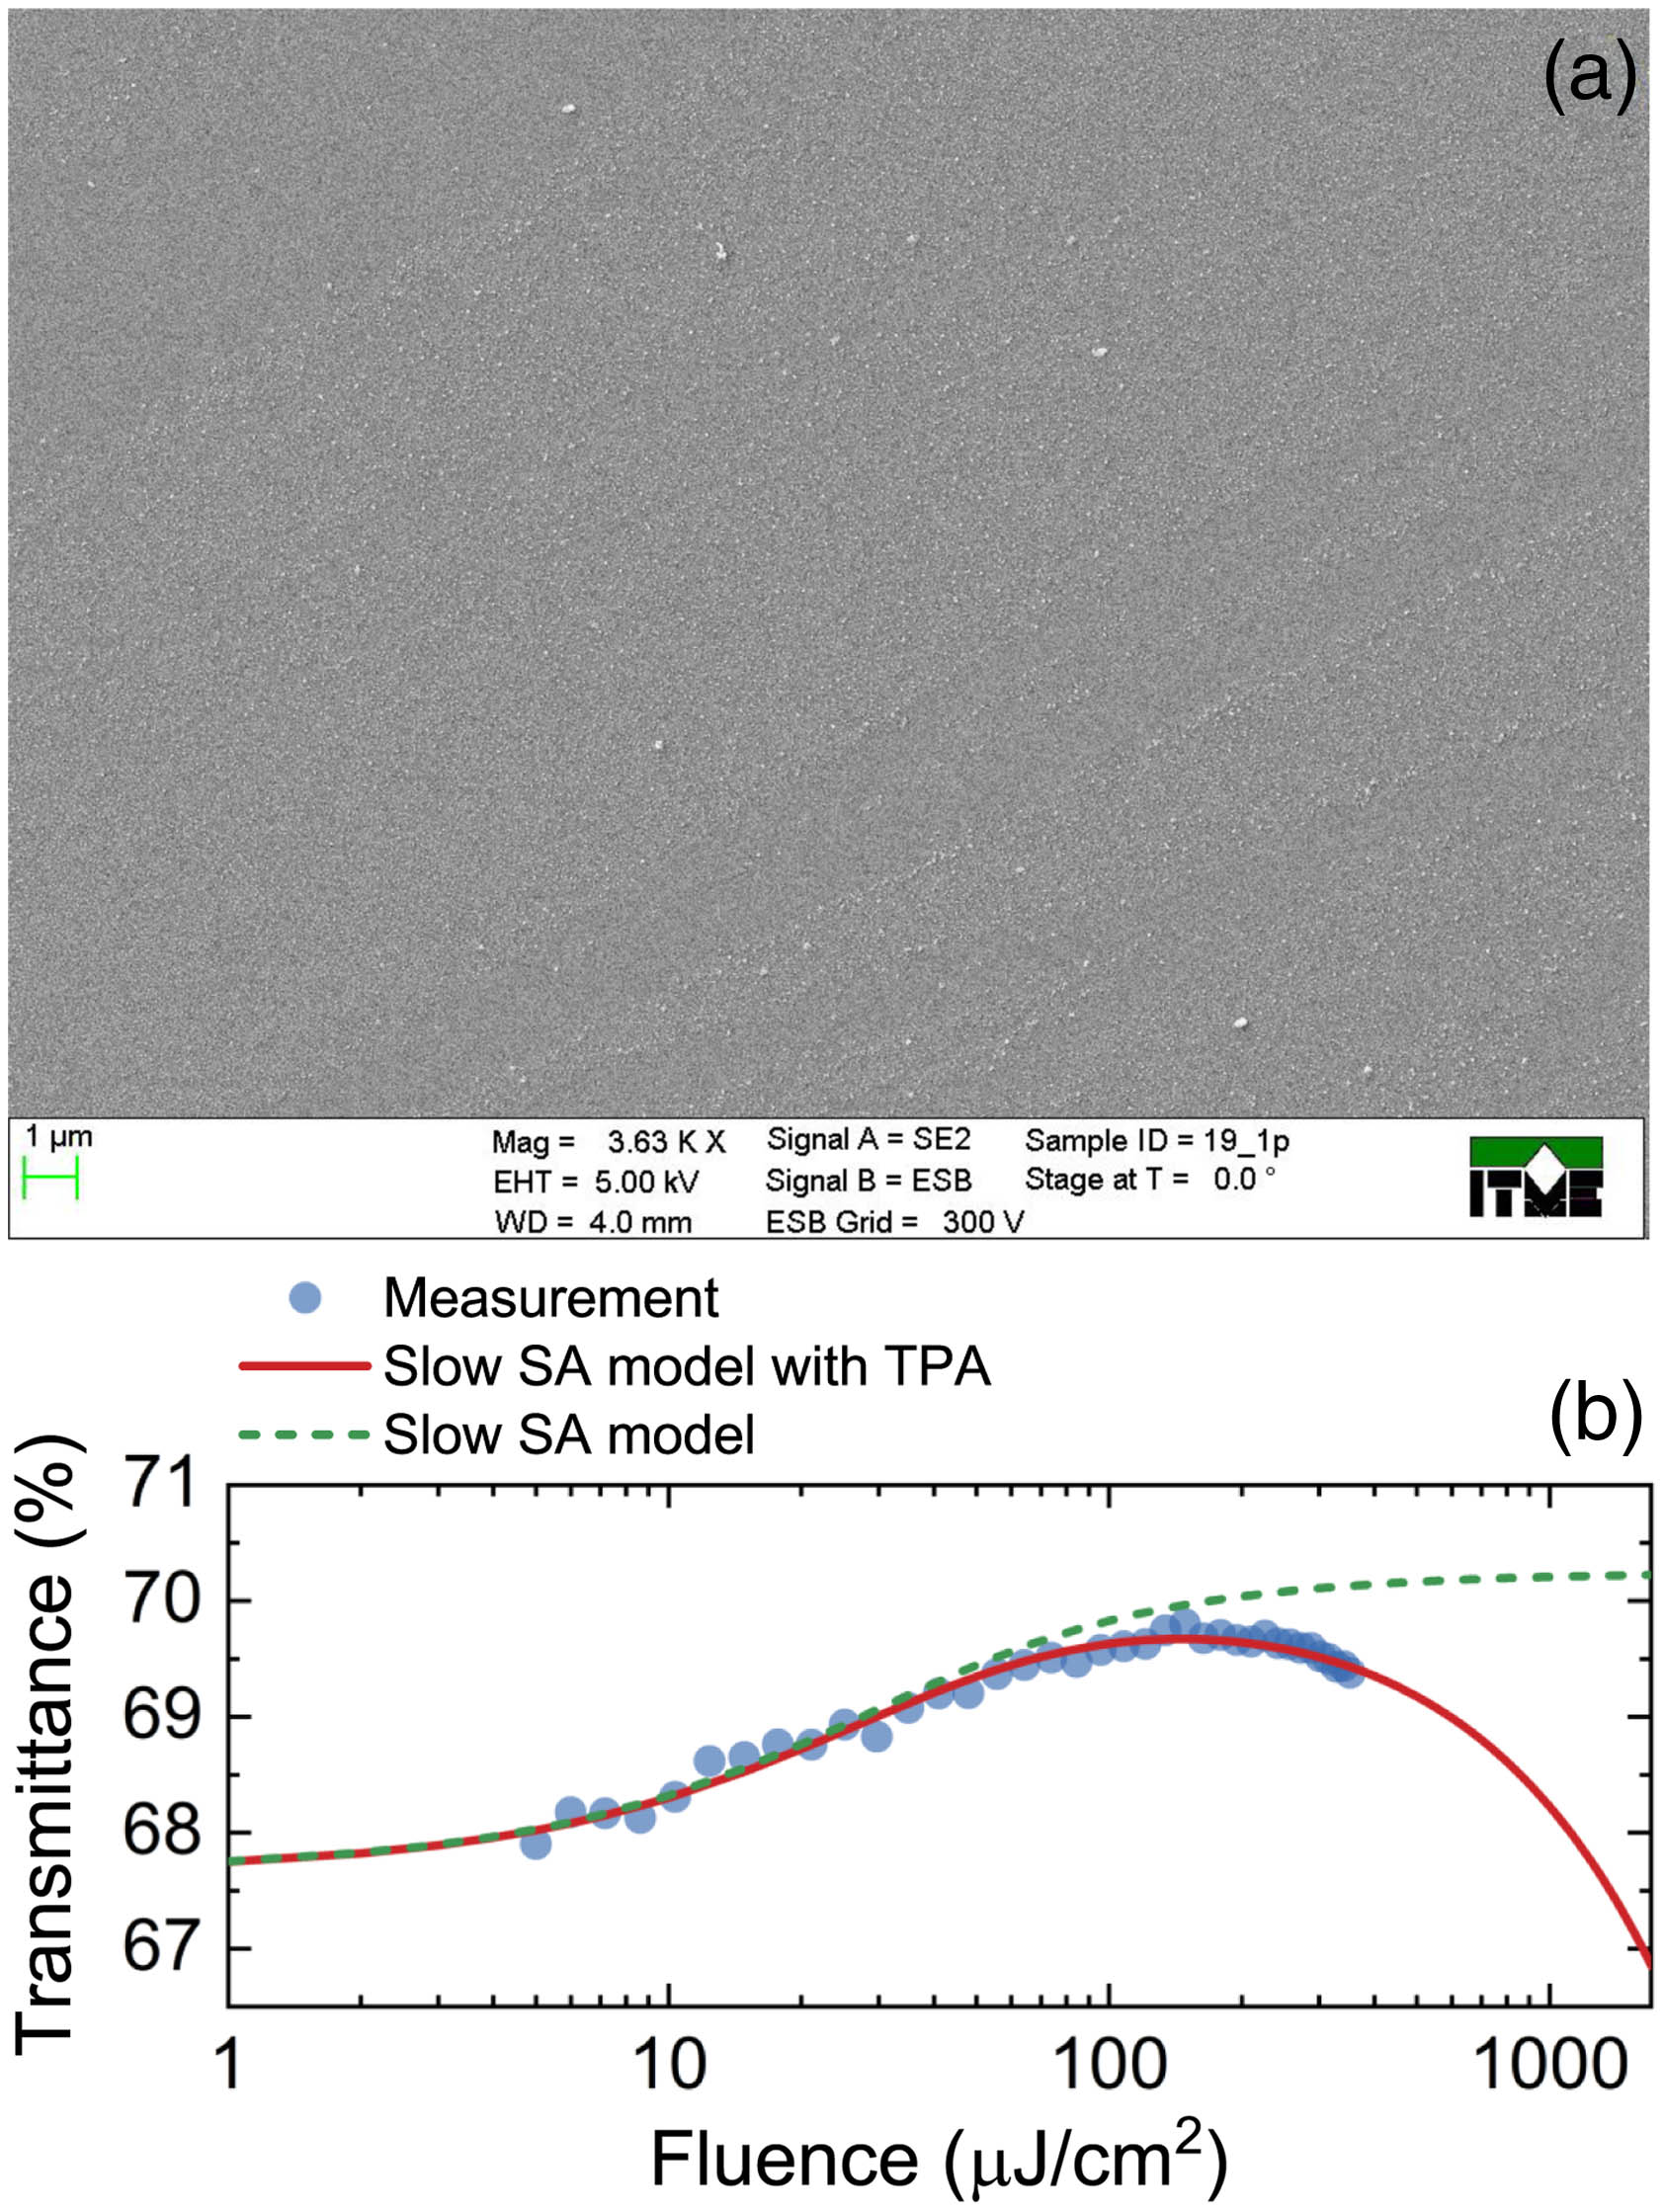 Characterization of the SA. (a) SEM image of the surface of the Sb2Te3 layer. (b) Nonlinear transmittance of the Sb2Te2 SA fitted with a slow SA model with TPA. Dashed line shows a simulated nonlinear transmittance when the TPA is not included.